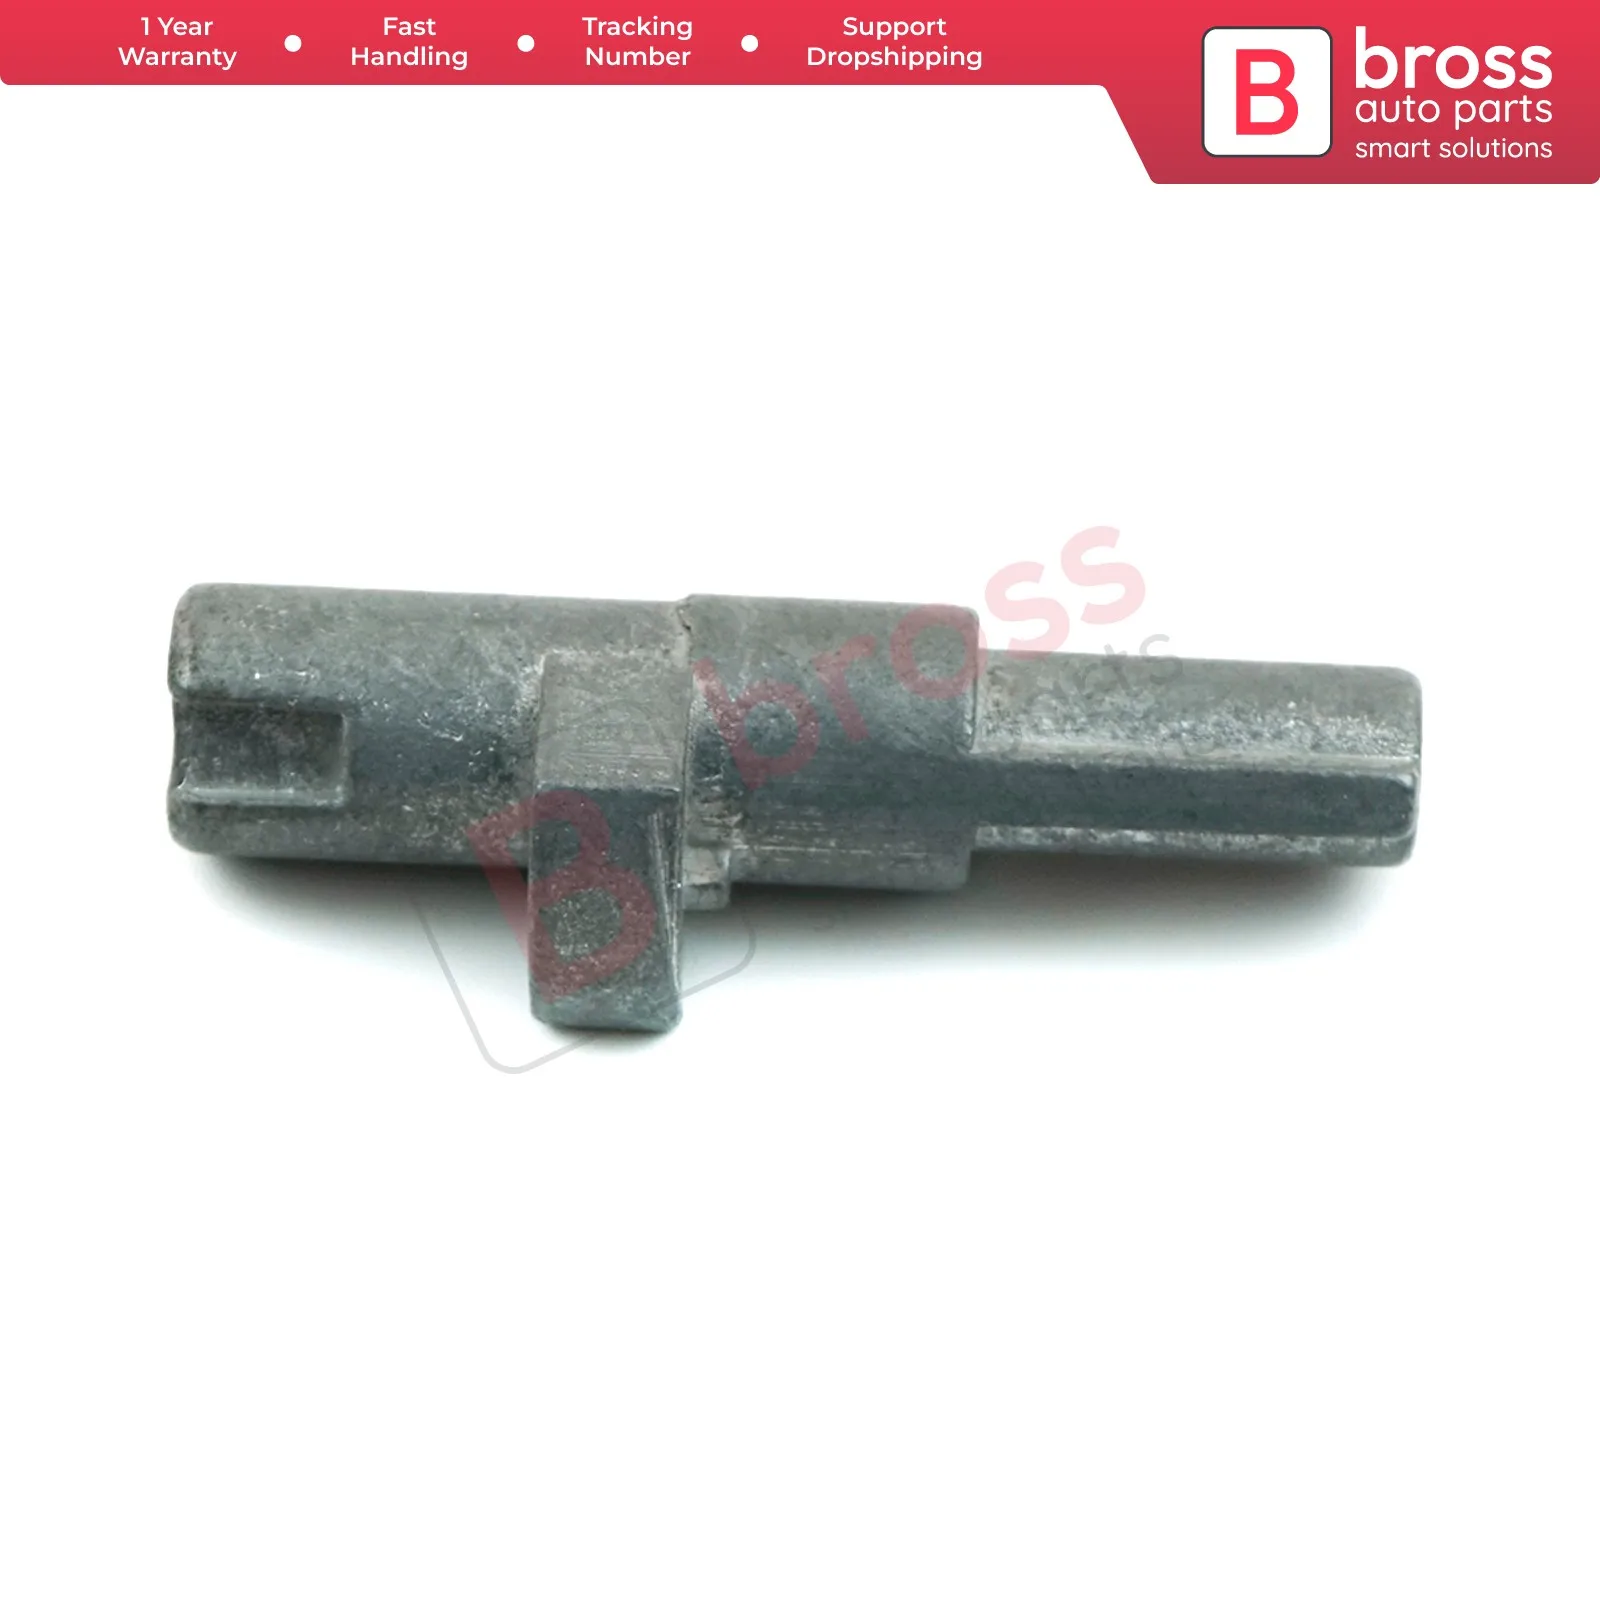 

Bross Auto Parts BSP15 Ignition Lock Cylinder Tab Short For Mercedes E CLASS W210 1995-2003 Fast Shipment Ship From Turkey